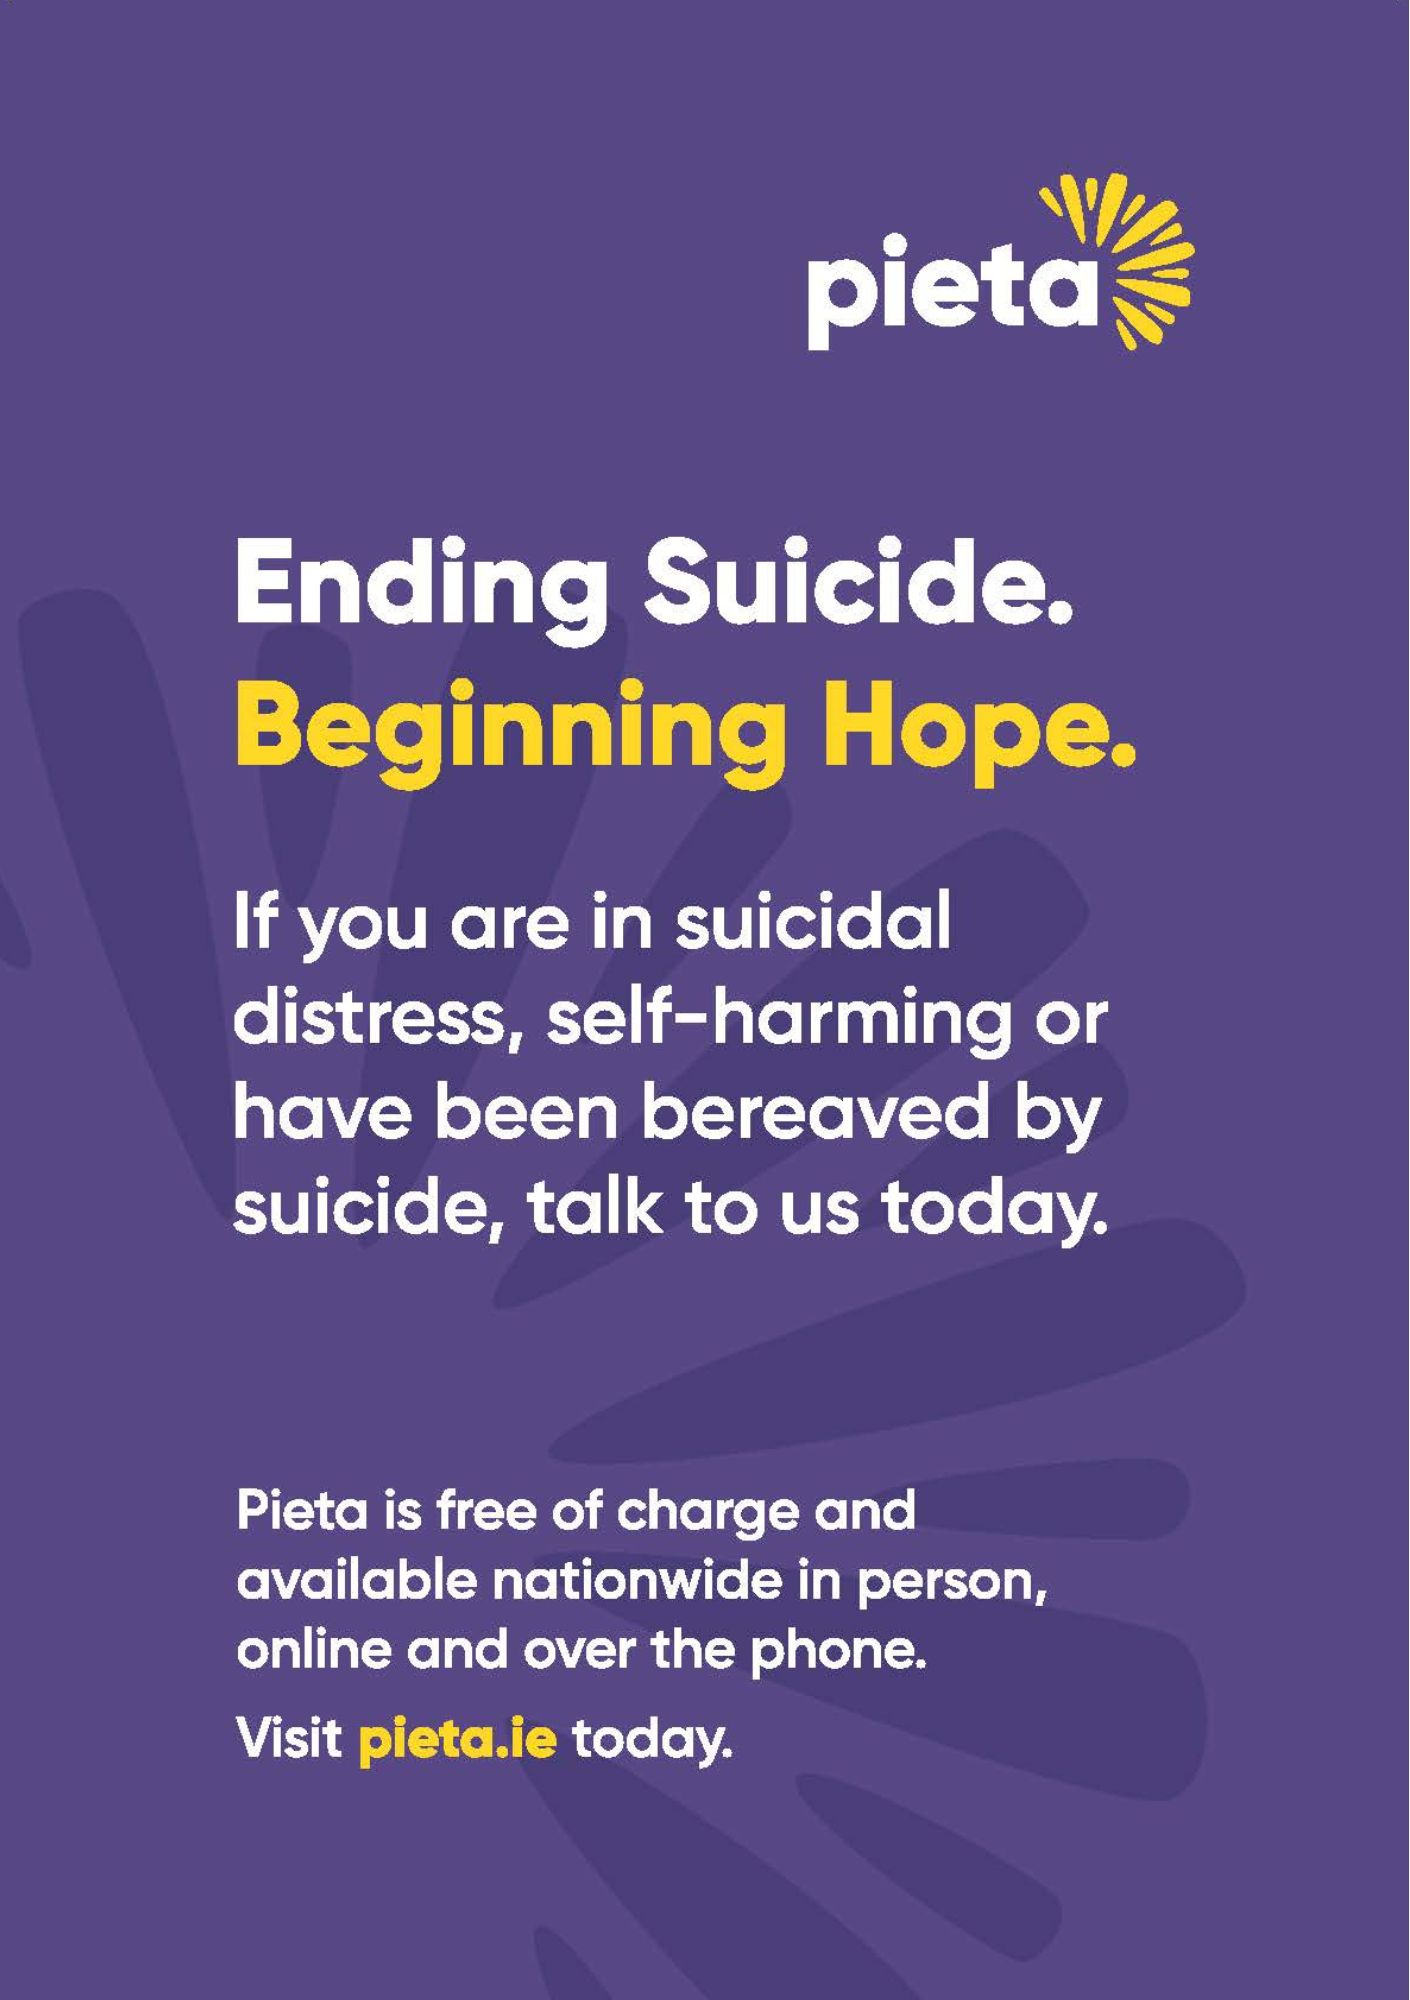 You are not alone. Pieta House are here to help if you need someone to talk to. 